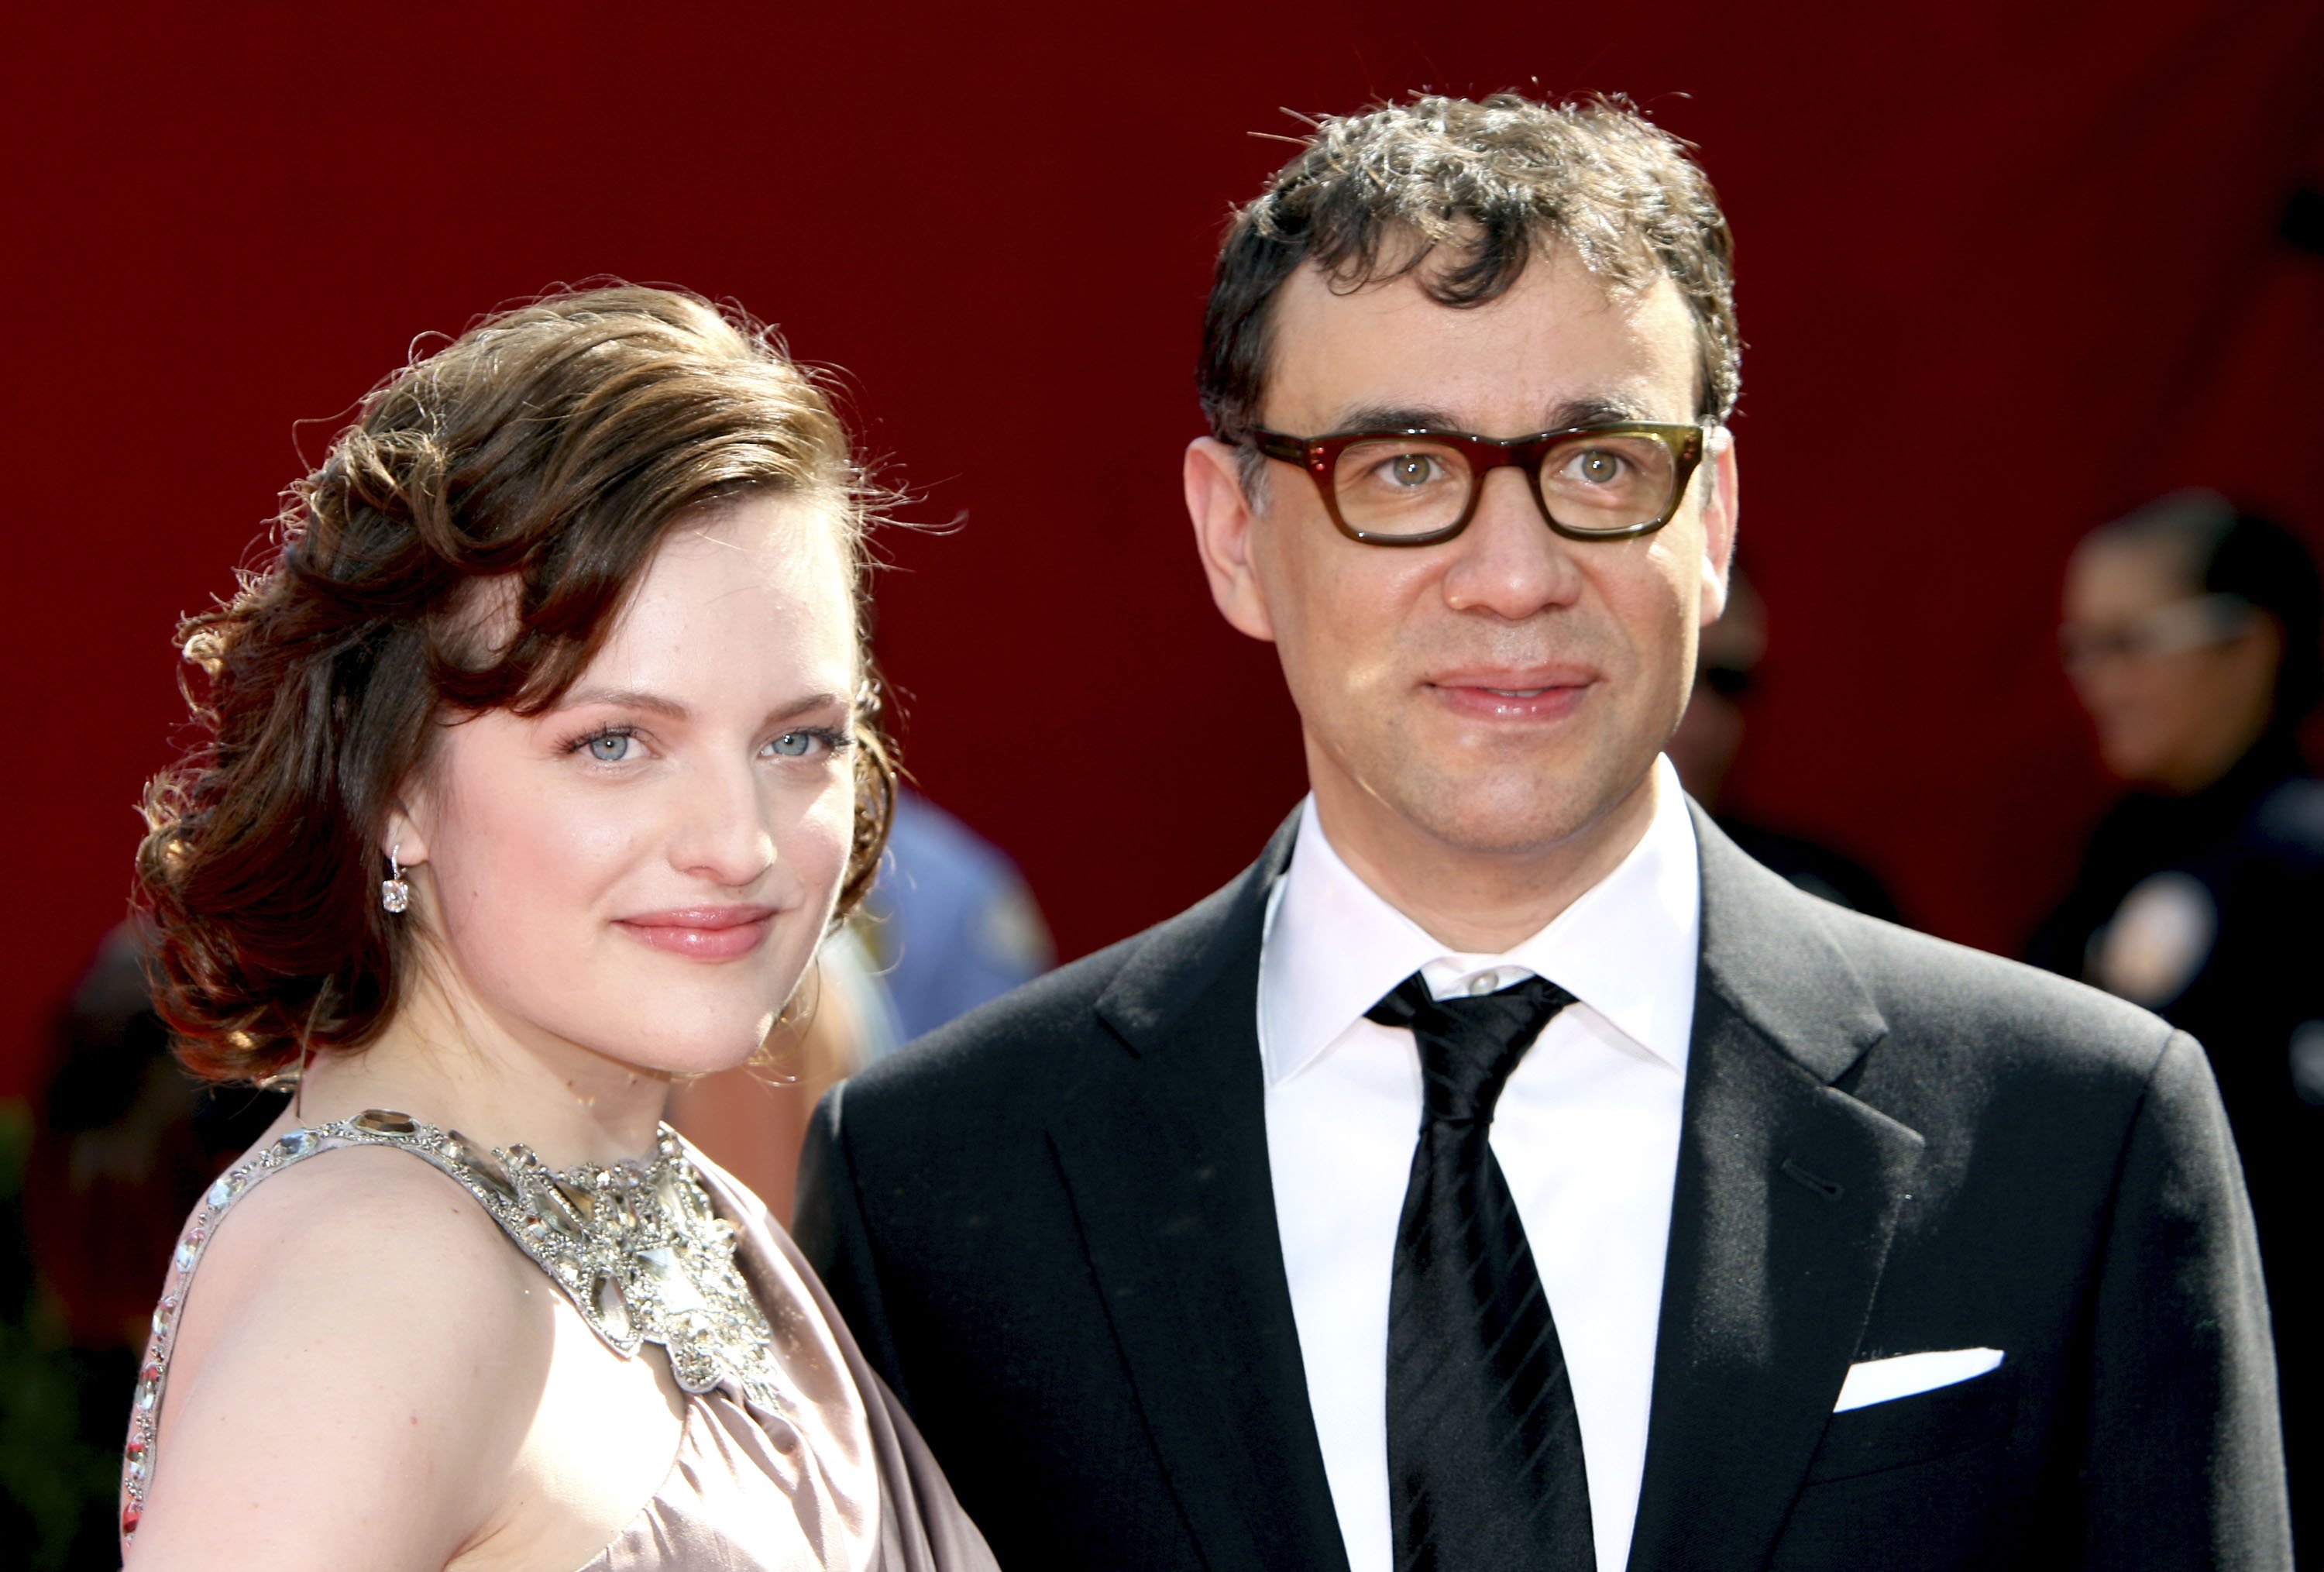 Elisabeth Moss and Fred Armisen at the Nokia Theatre on September 20, 2009 in Los Angeles, California. I Source: Getty Images